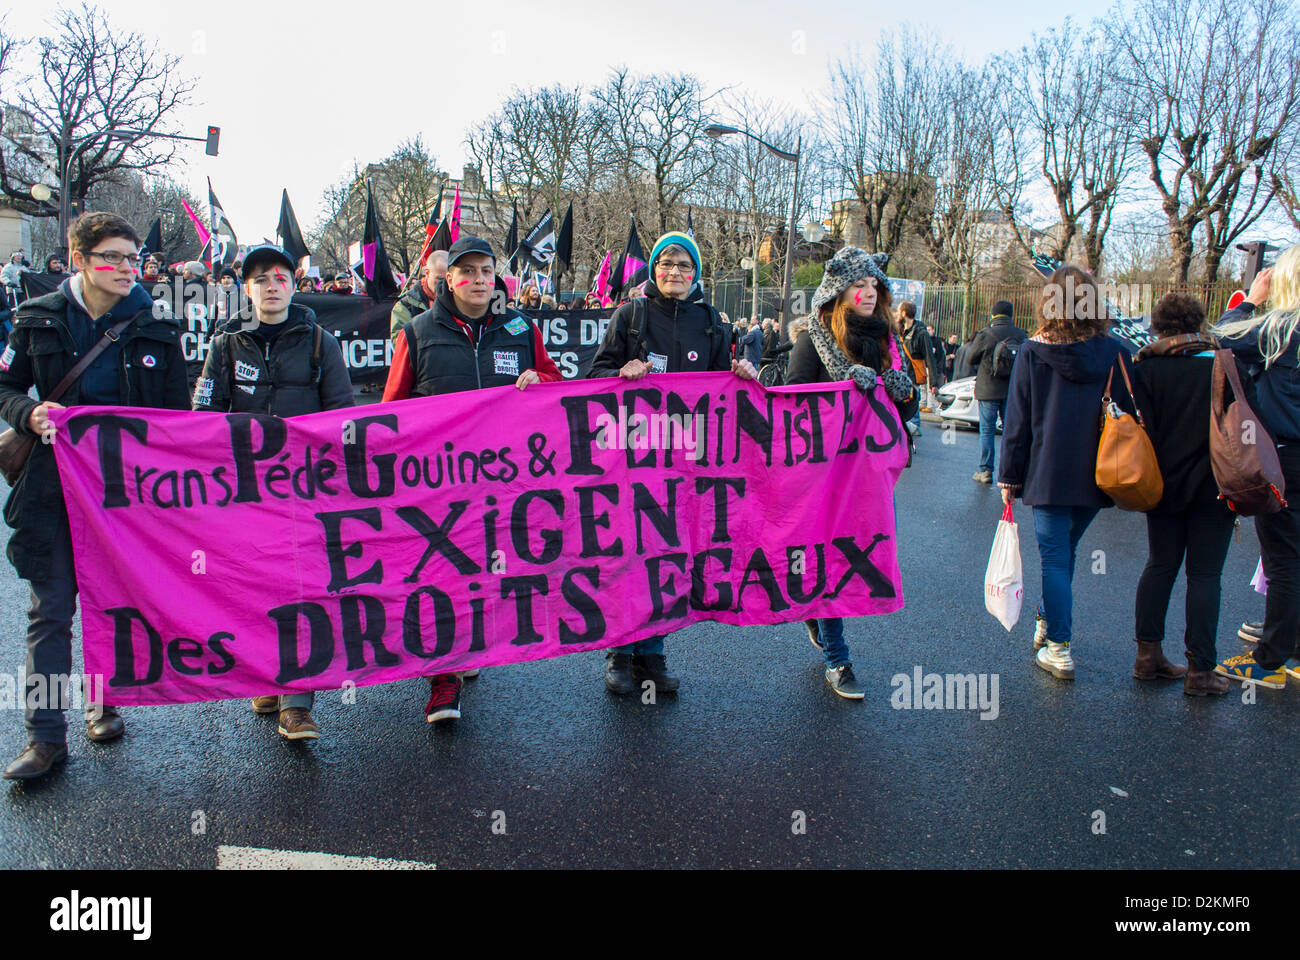 Paris, France. French LGTB N.G.O. Groups women protesters marching for rights at pro Gay Mar-riage Demonstration, Holding Protesters Banners: 'Trans Faggots, Lesbians and Feminists Demand Equal Rights' trans rights protest, homophobia transphobia, transgender rights Stock Photo